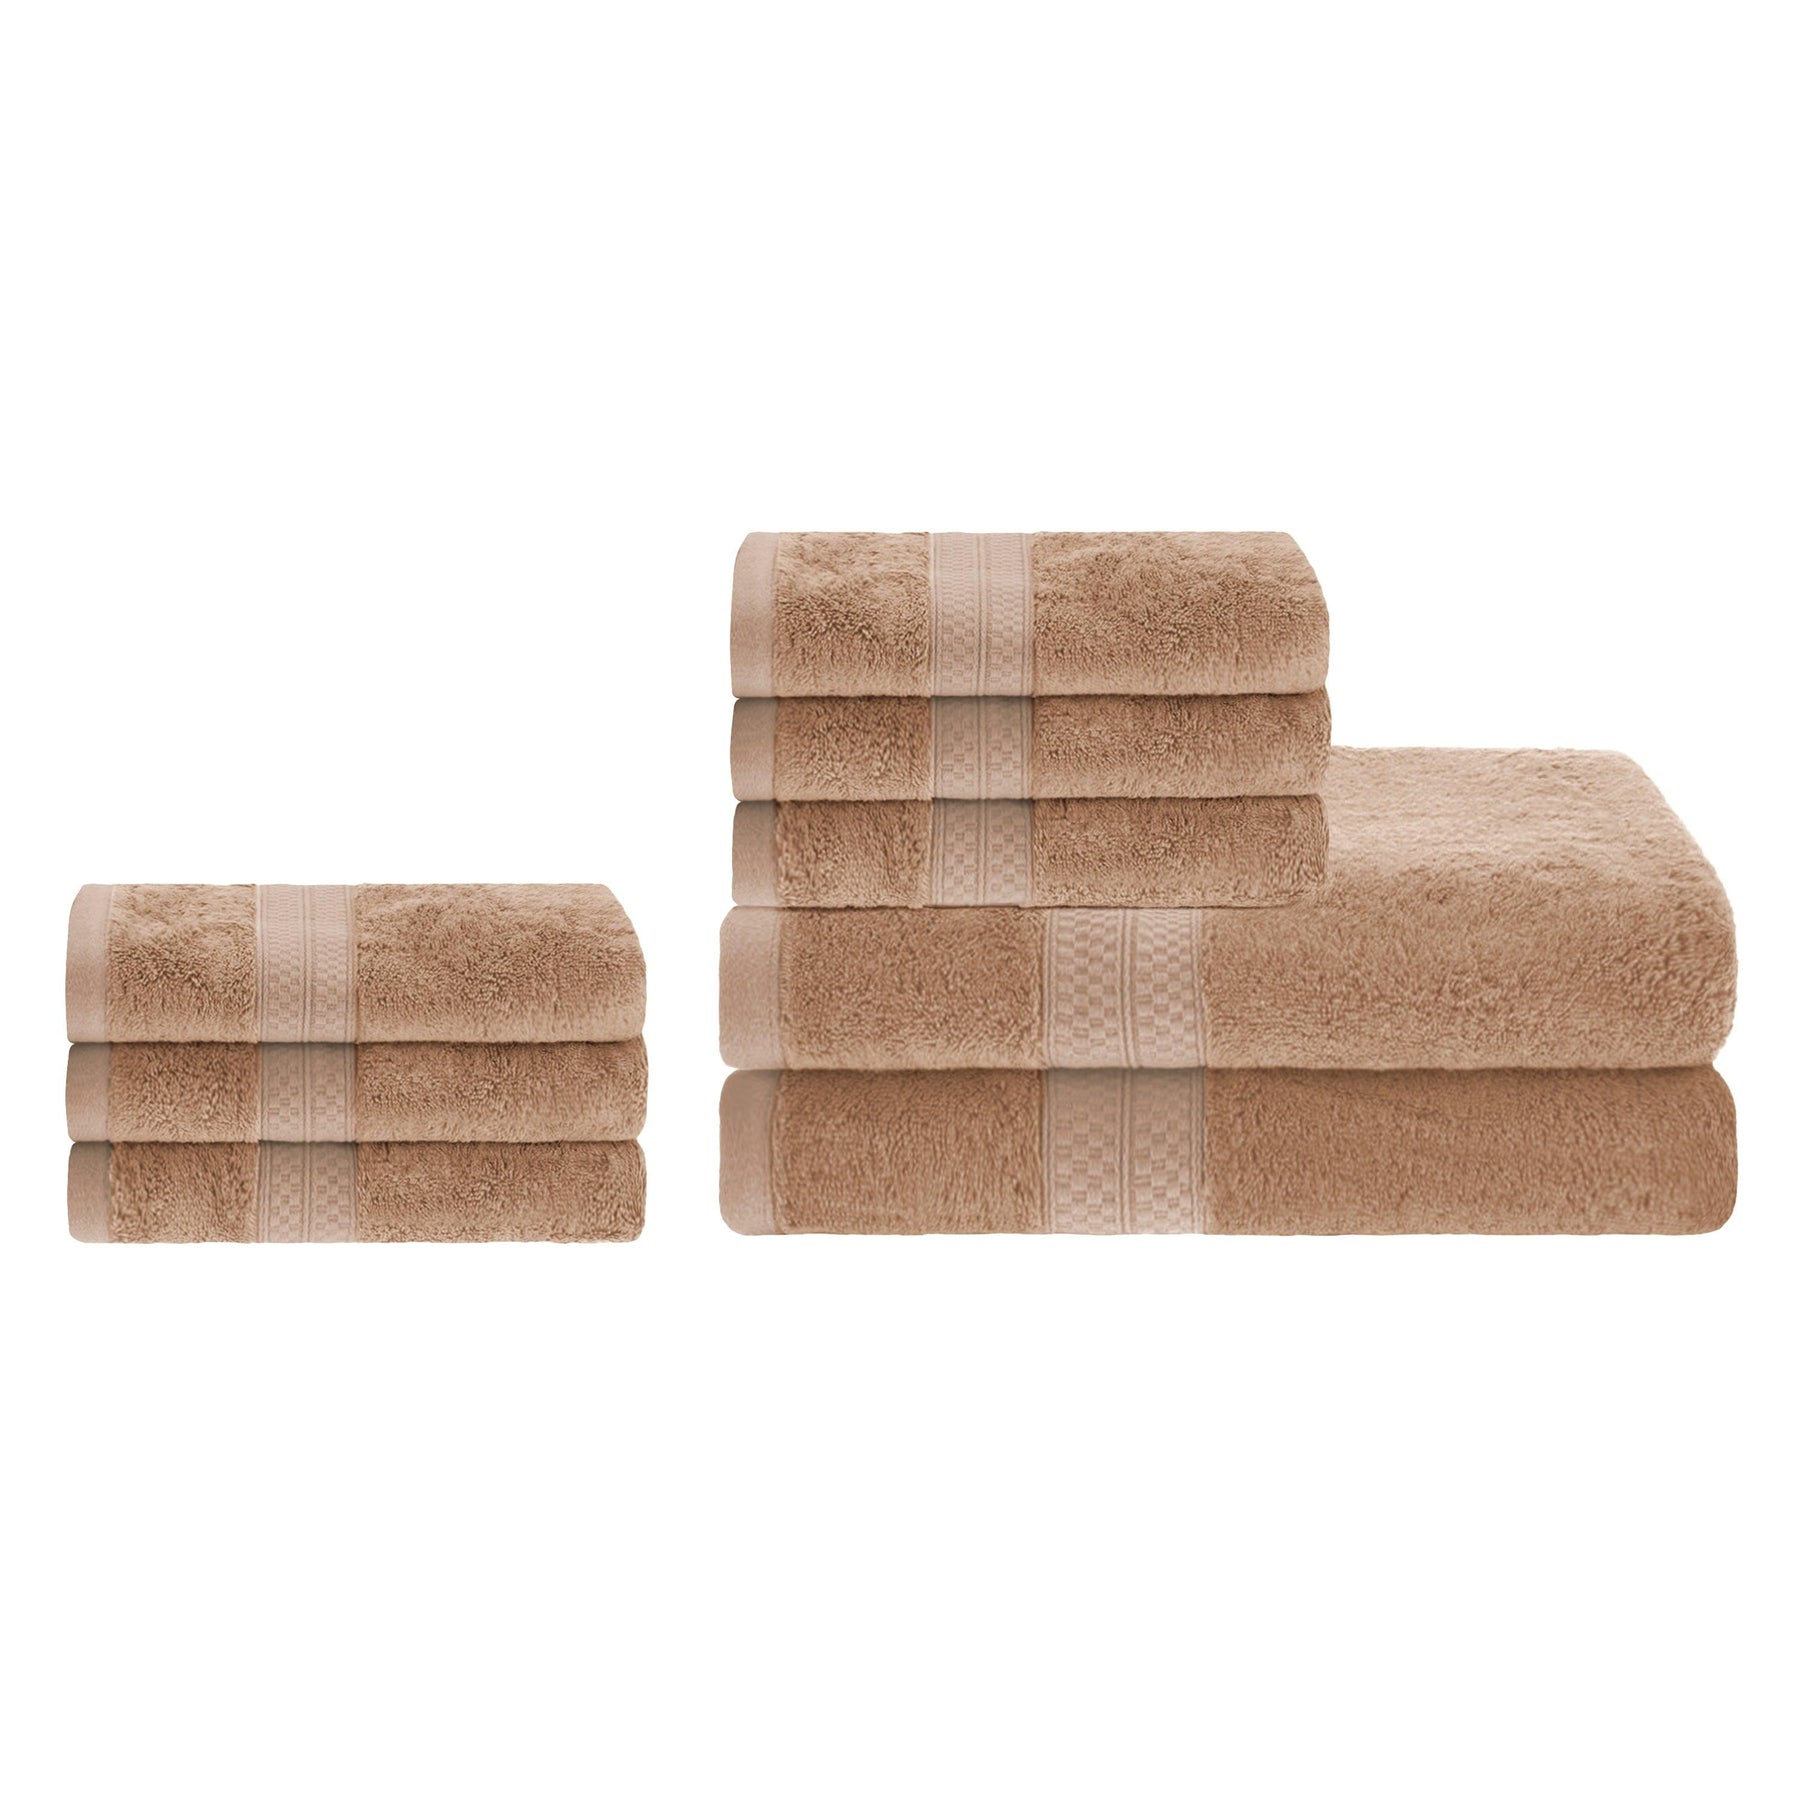 Ultra-Soft Hypoallergenic Rayon from Bamboo Cotton Blend Bath and Hand Towel set - Sand